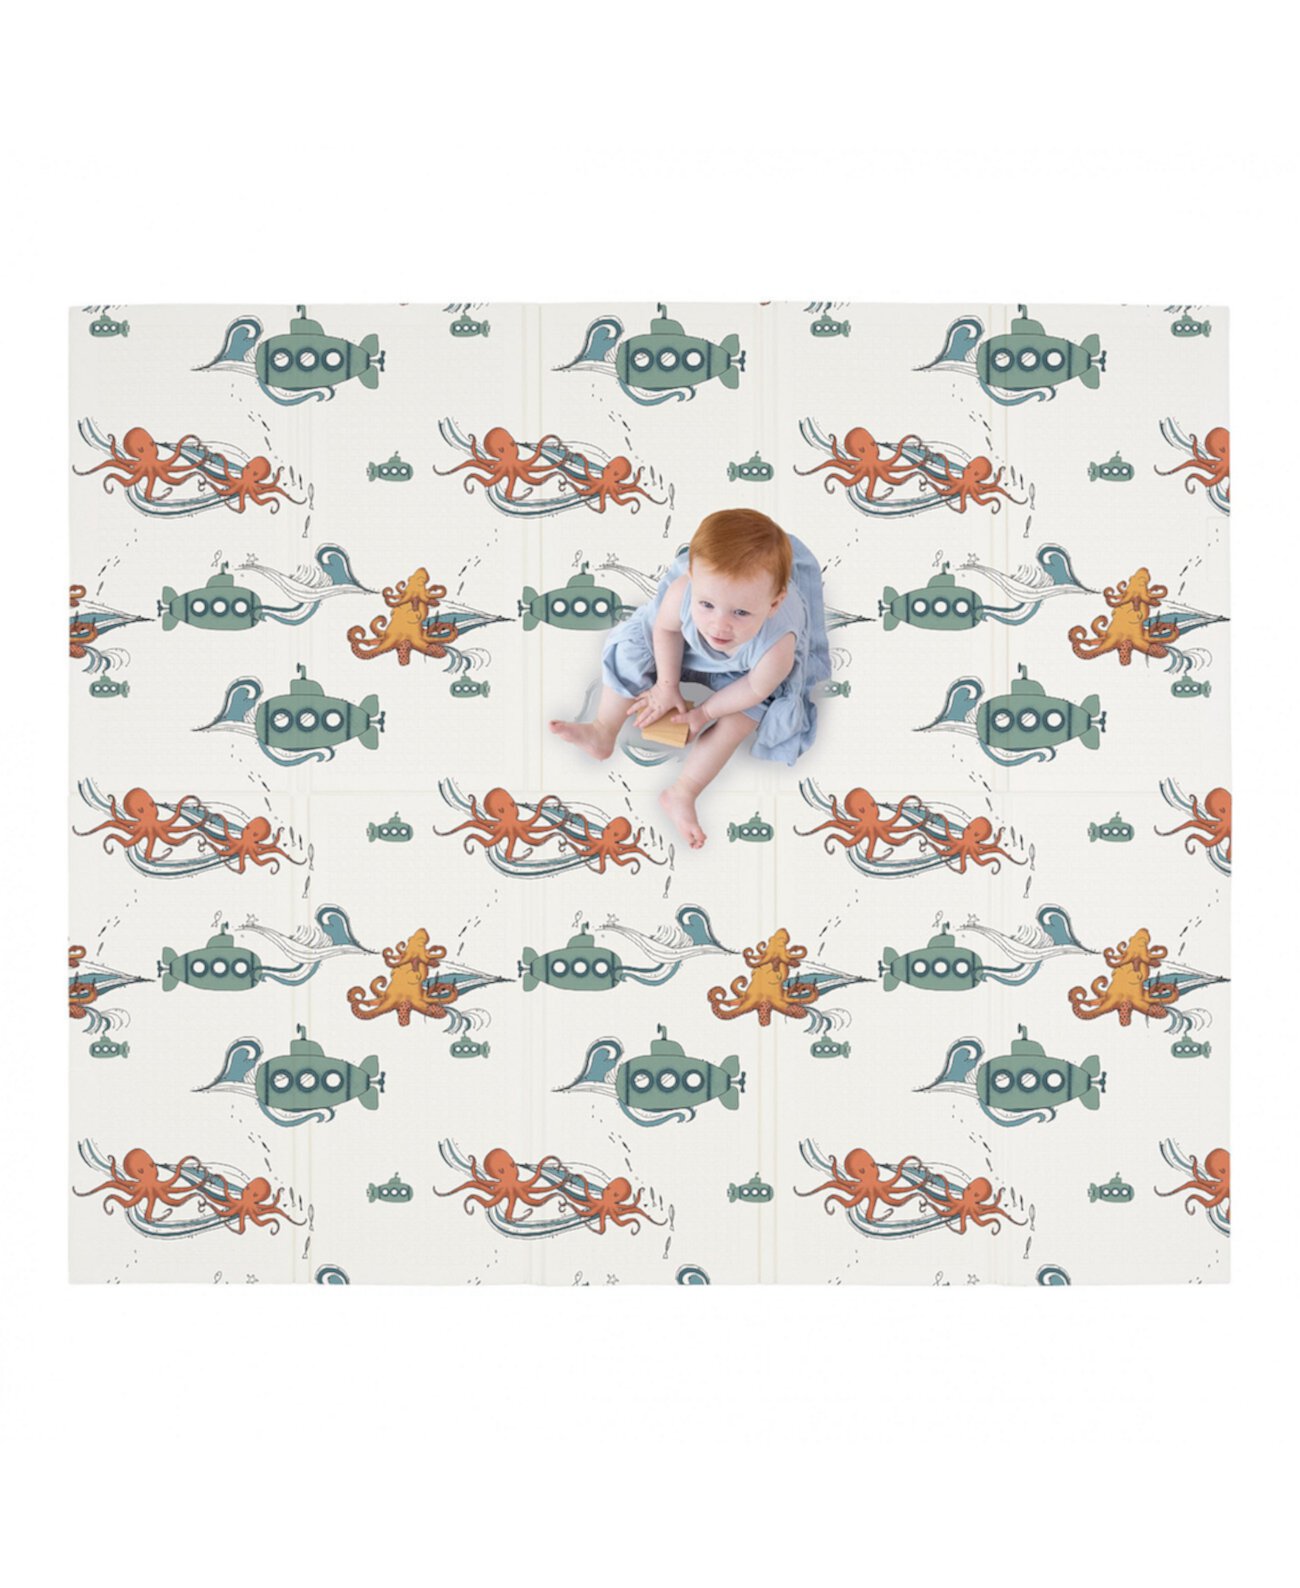 - Large Padded, Foam Play Mat for Baby 70 in. x 59 in. - Original 2 JumpOff Jo